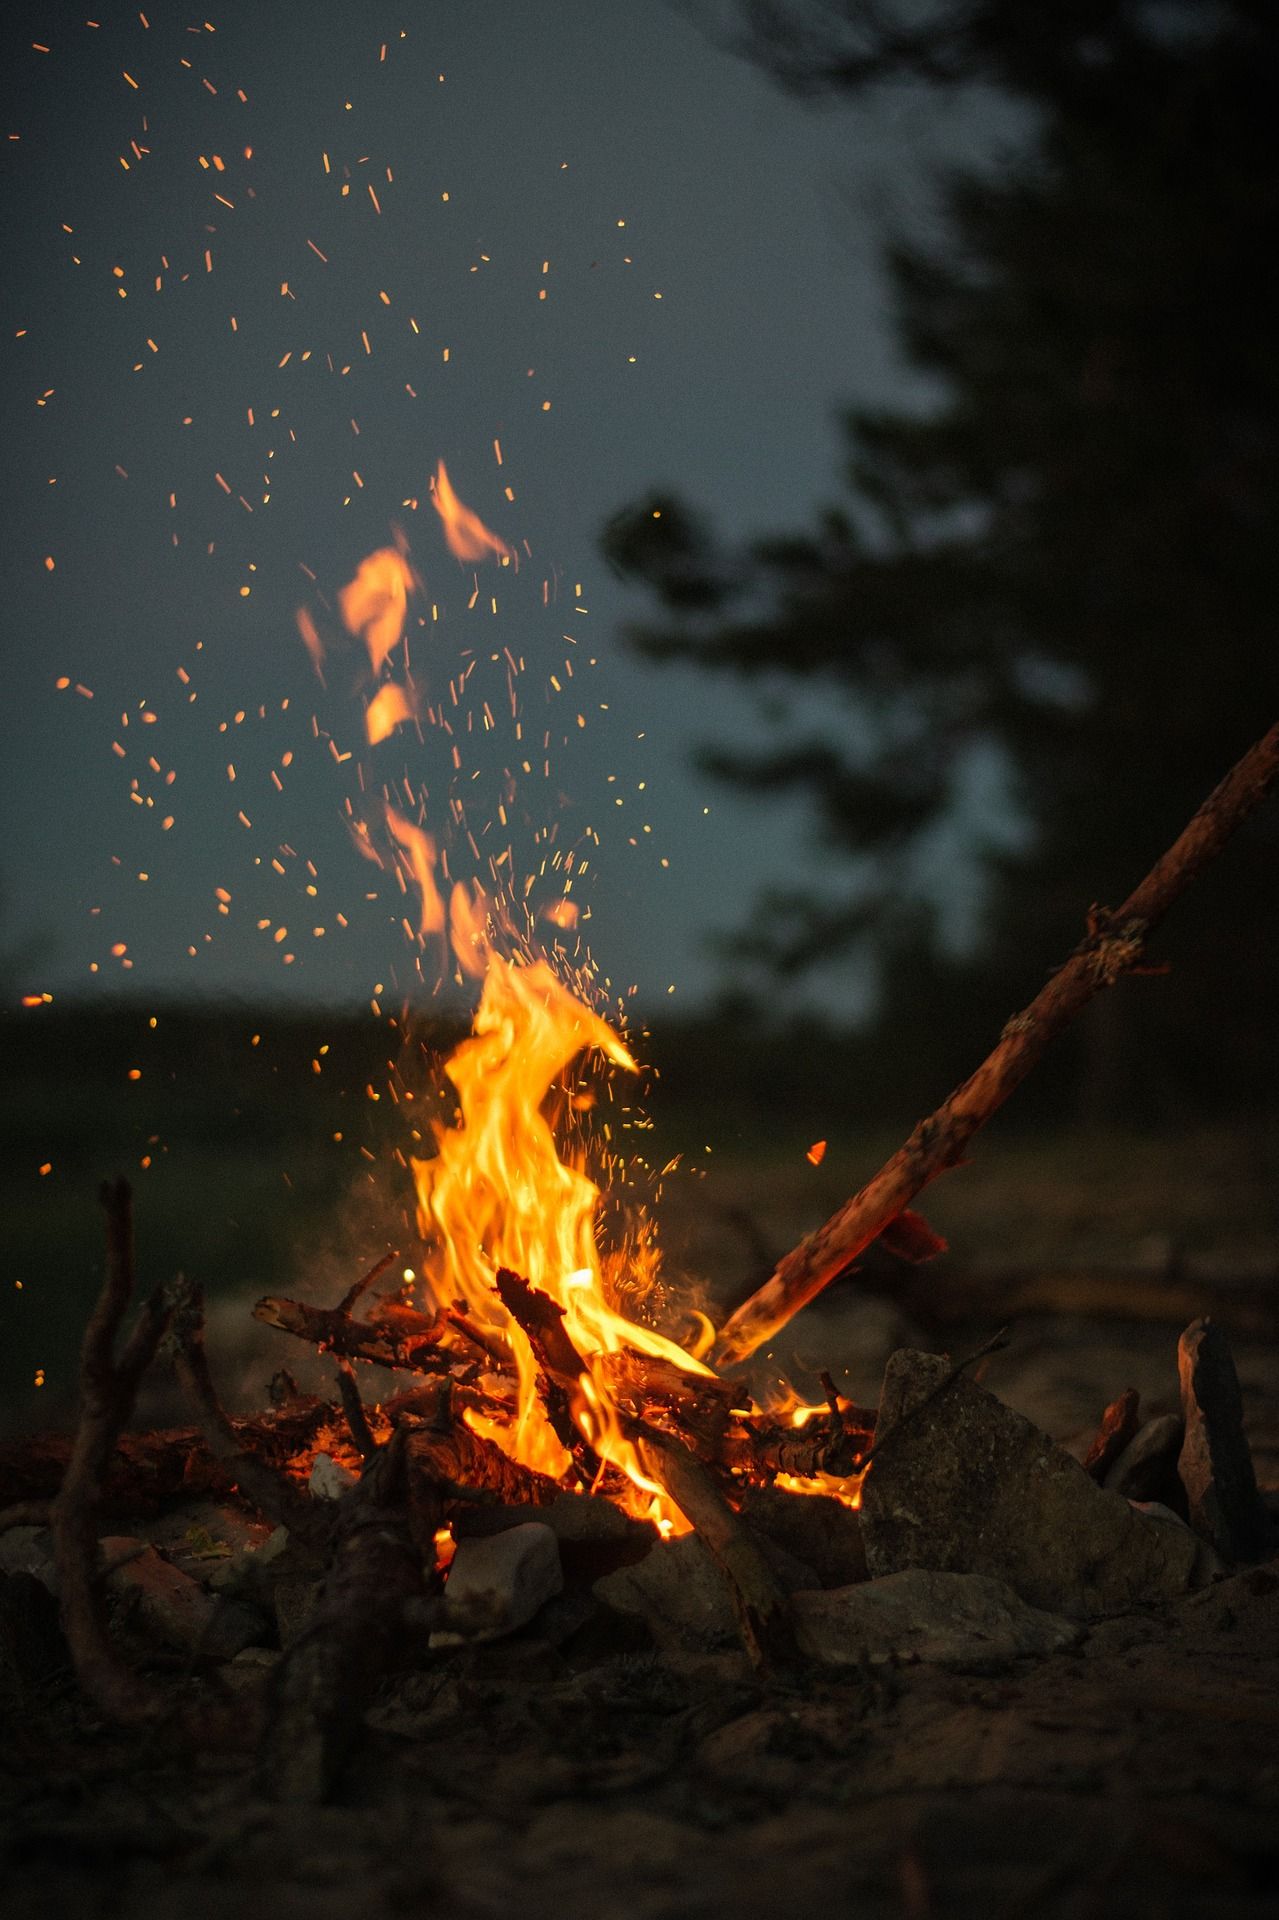 The best wood to use as firewood in a campfire. Camping wallpaper, Fire photography, Campfire